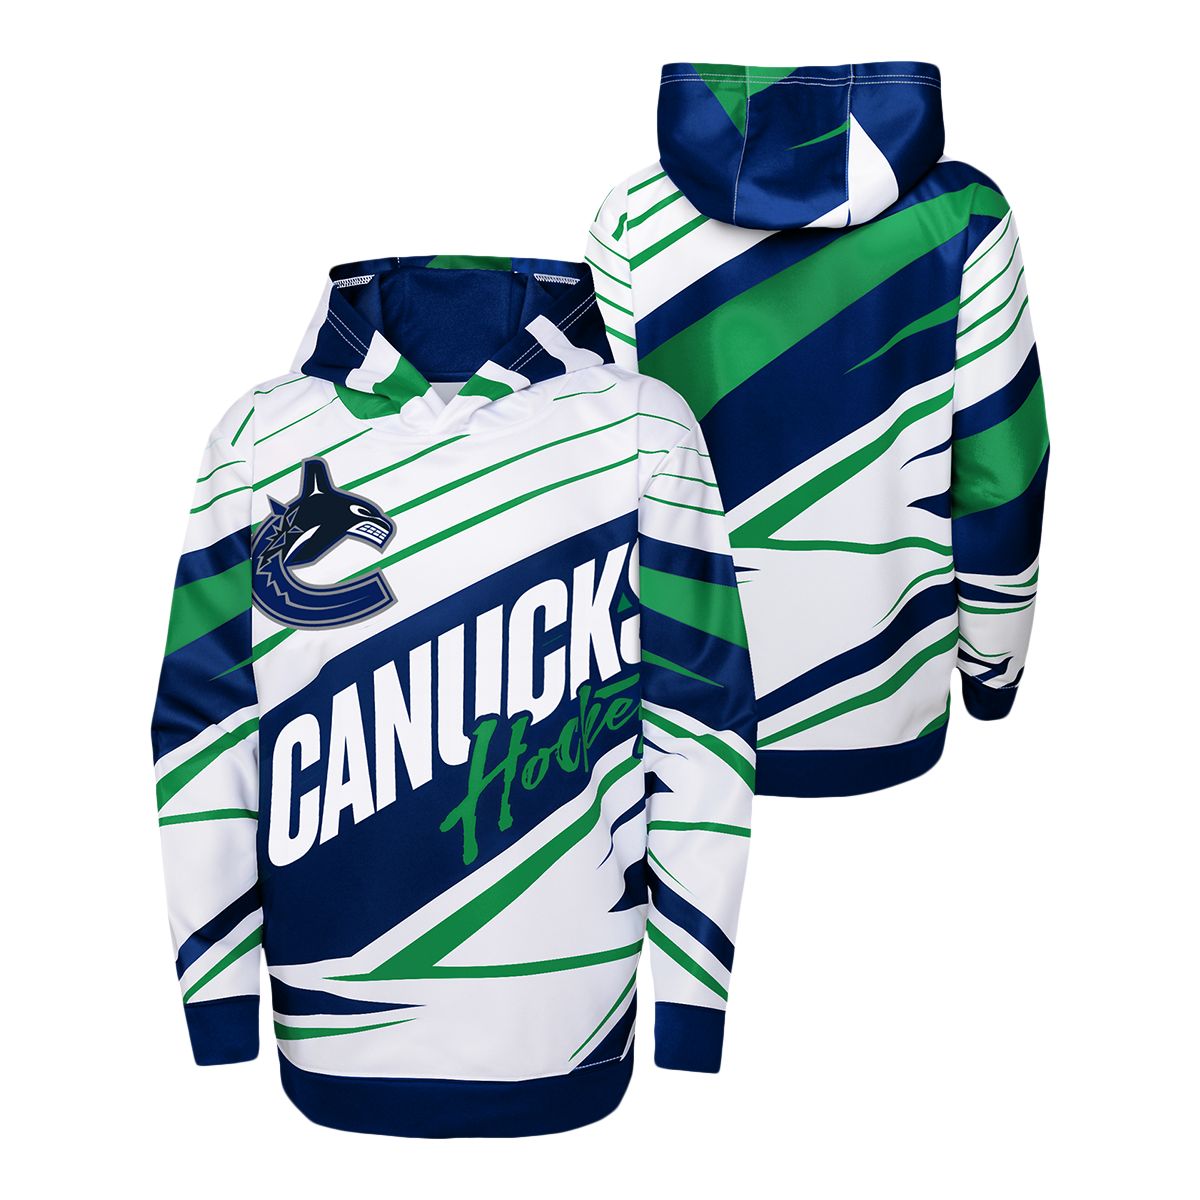  NHL Vancouver Canucks 8-20 Youth Alternate Color